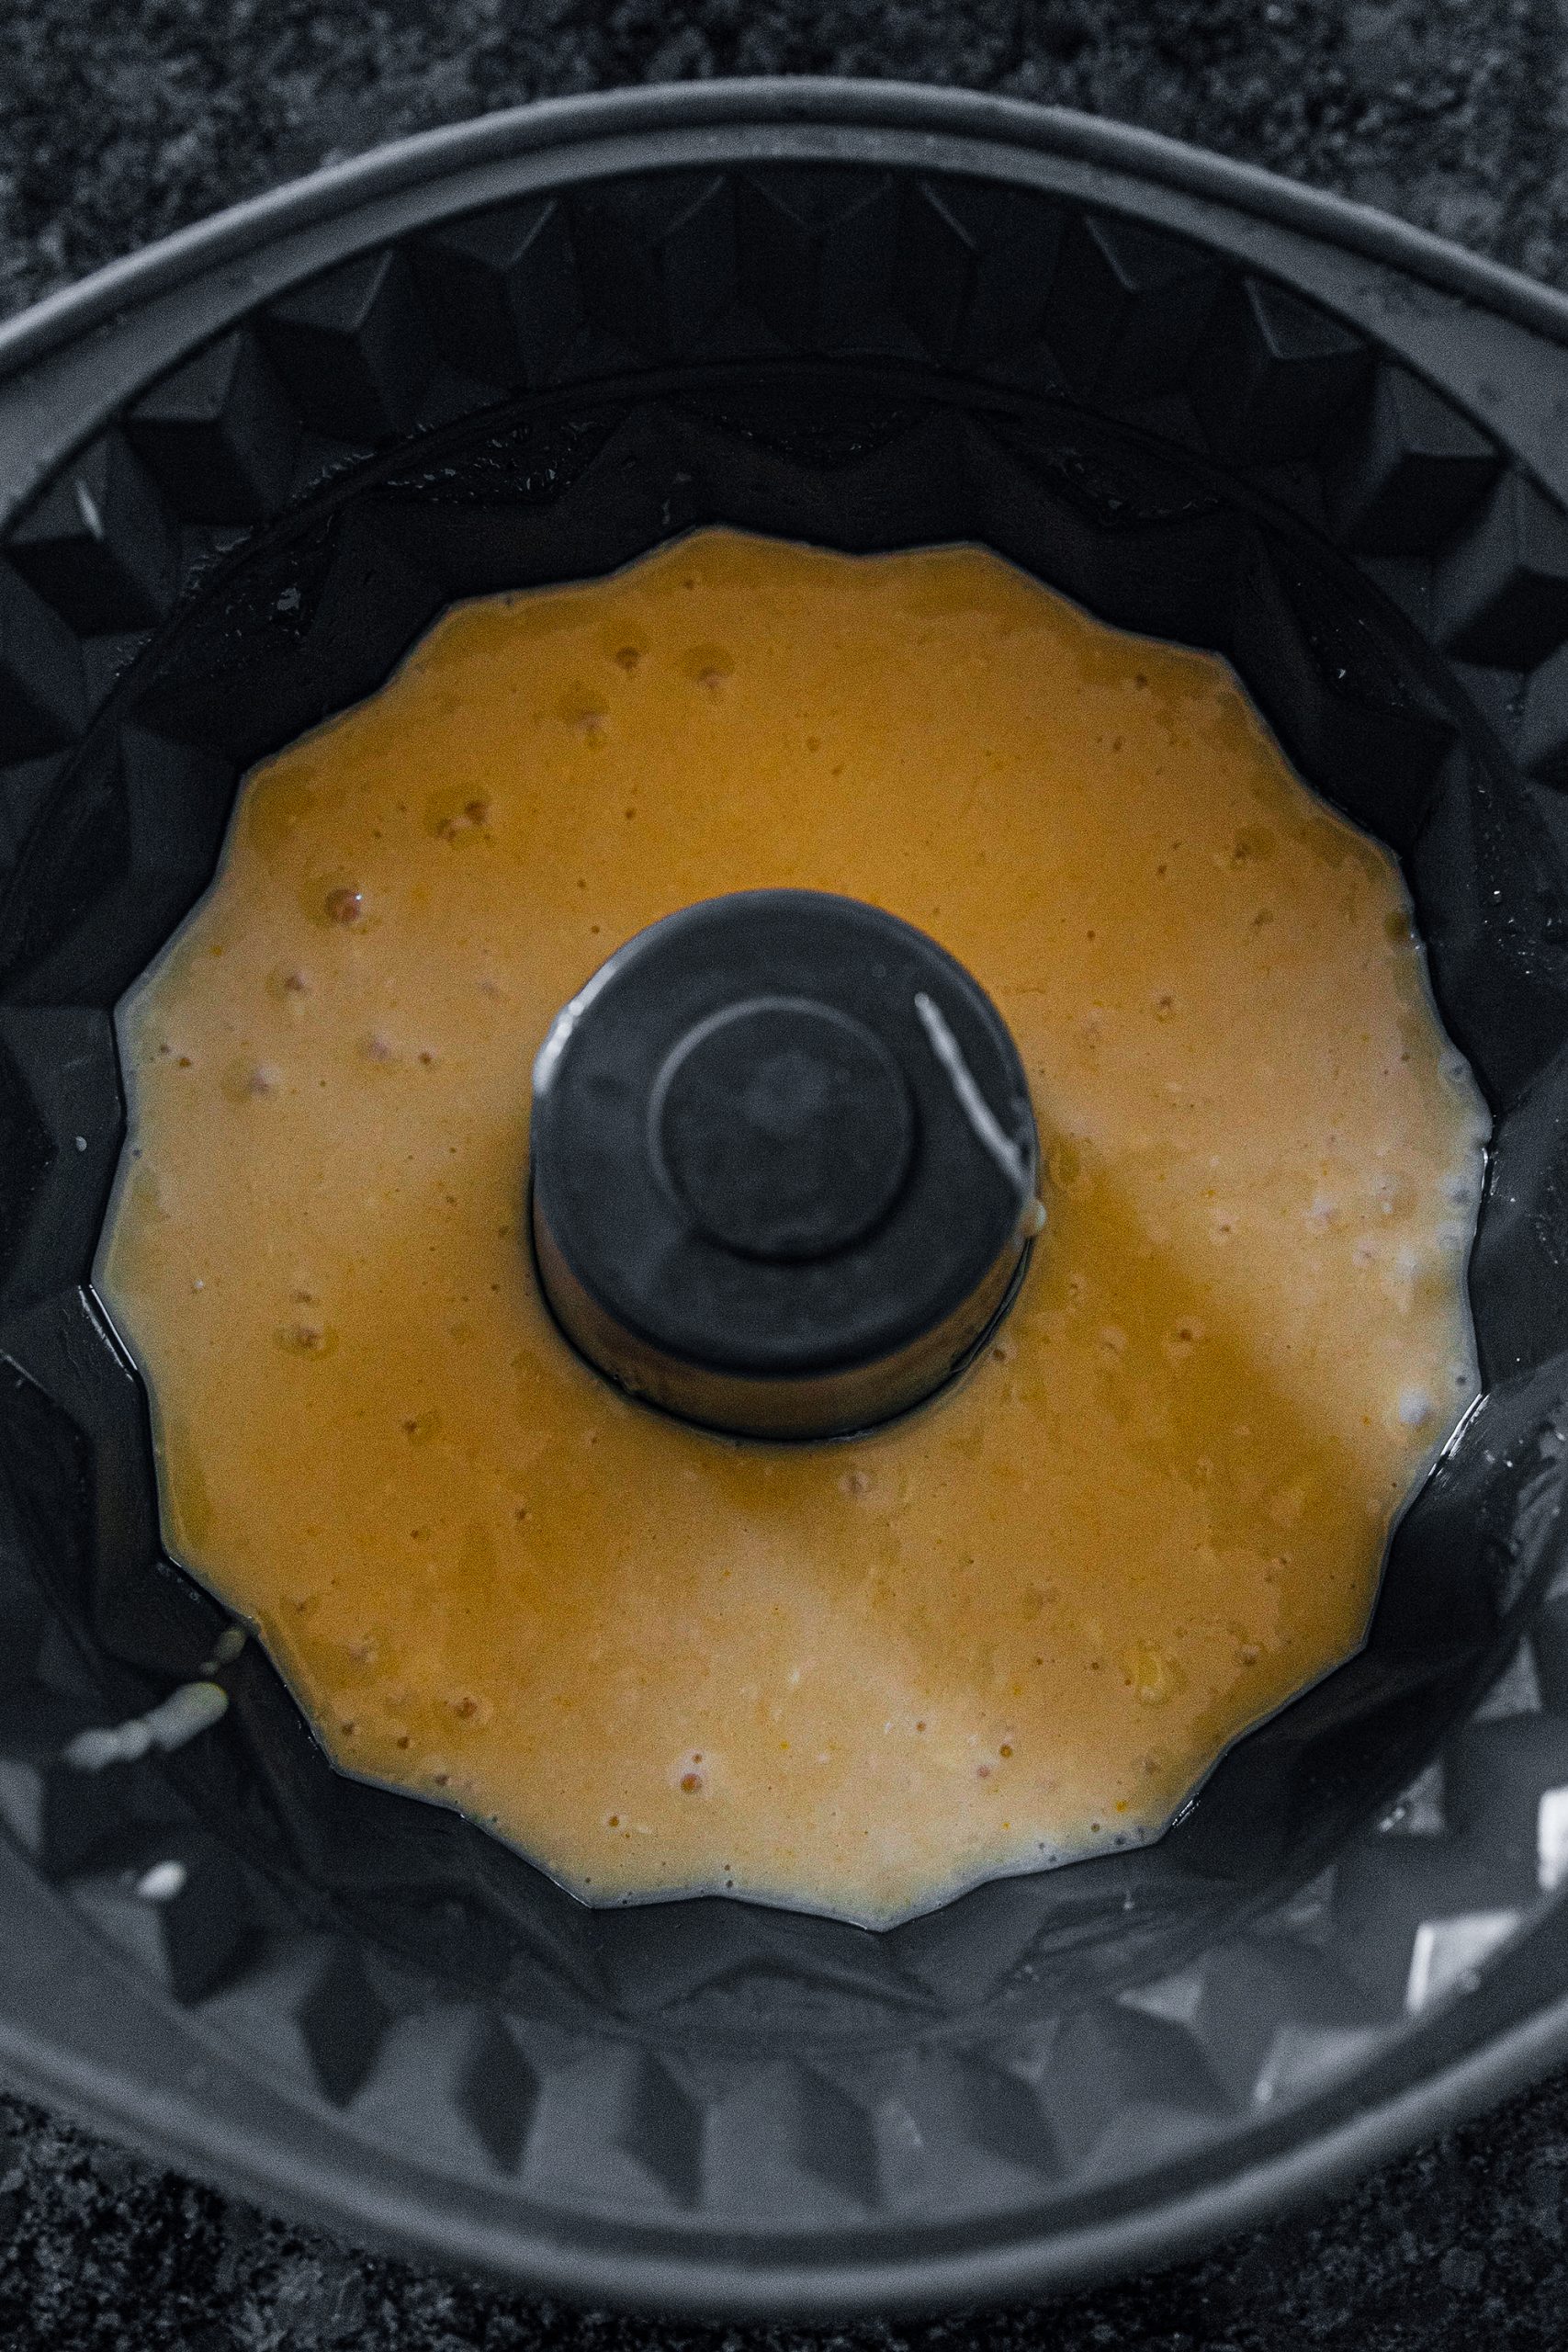 Grease a Bundt pan with butter and pour in the mixture.